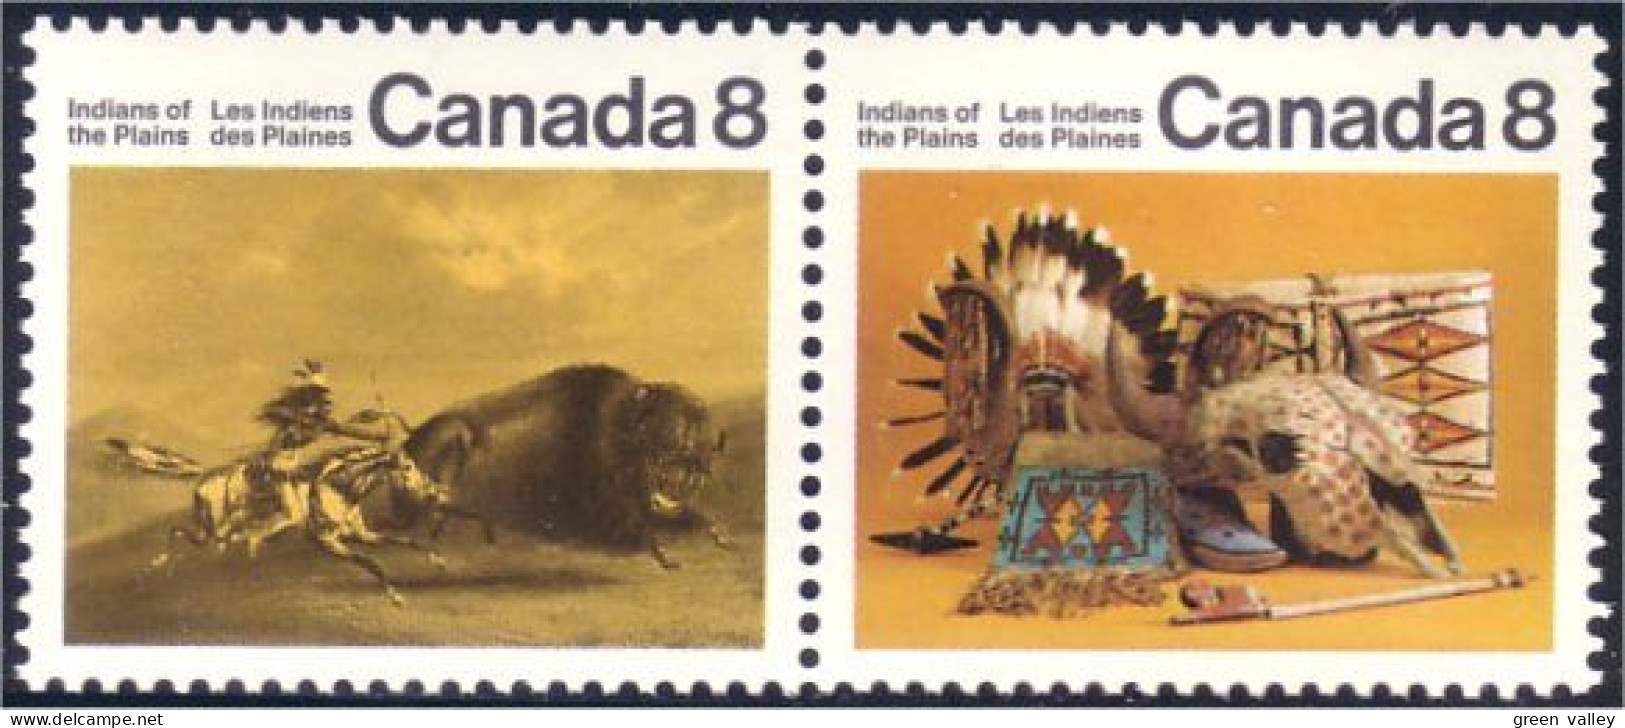 Canada Indian Artifacts Chasse Bison Buffalo Hunt Pipe MNH ** Neuf SC (C05-63ab) - Chevaux